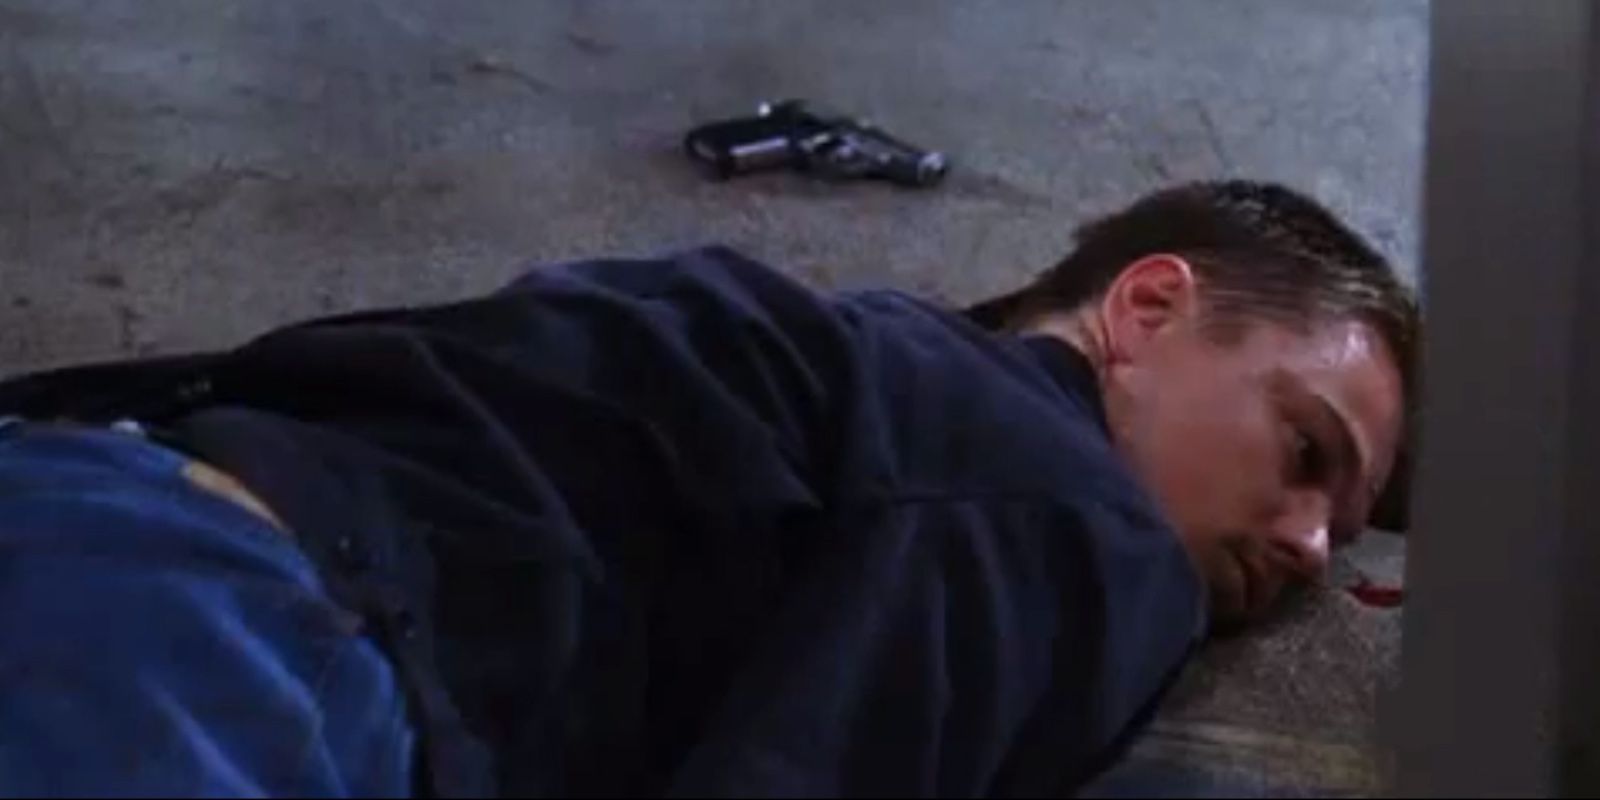 Billy laying on the ground in The Departed